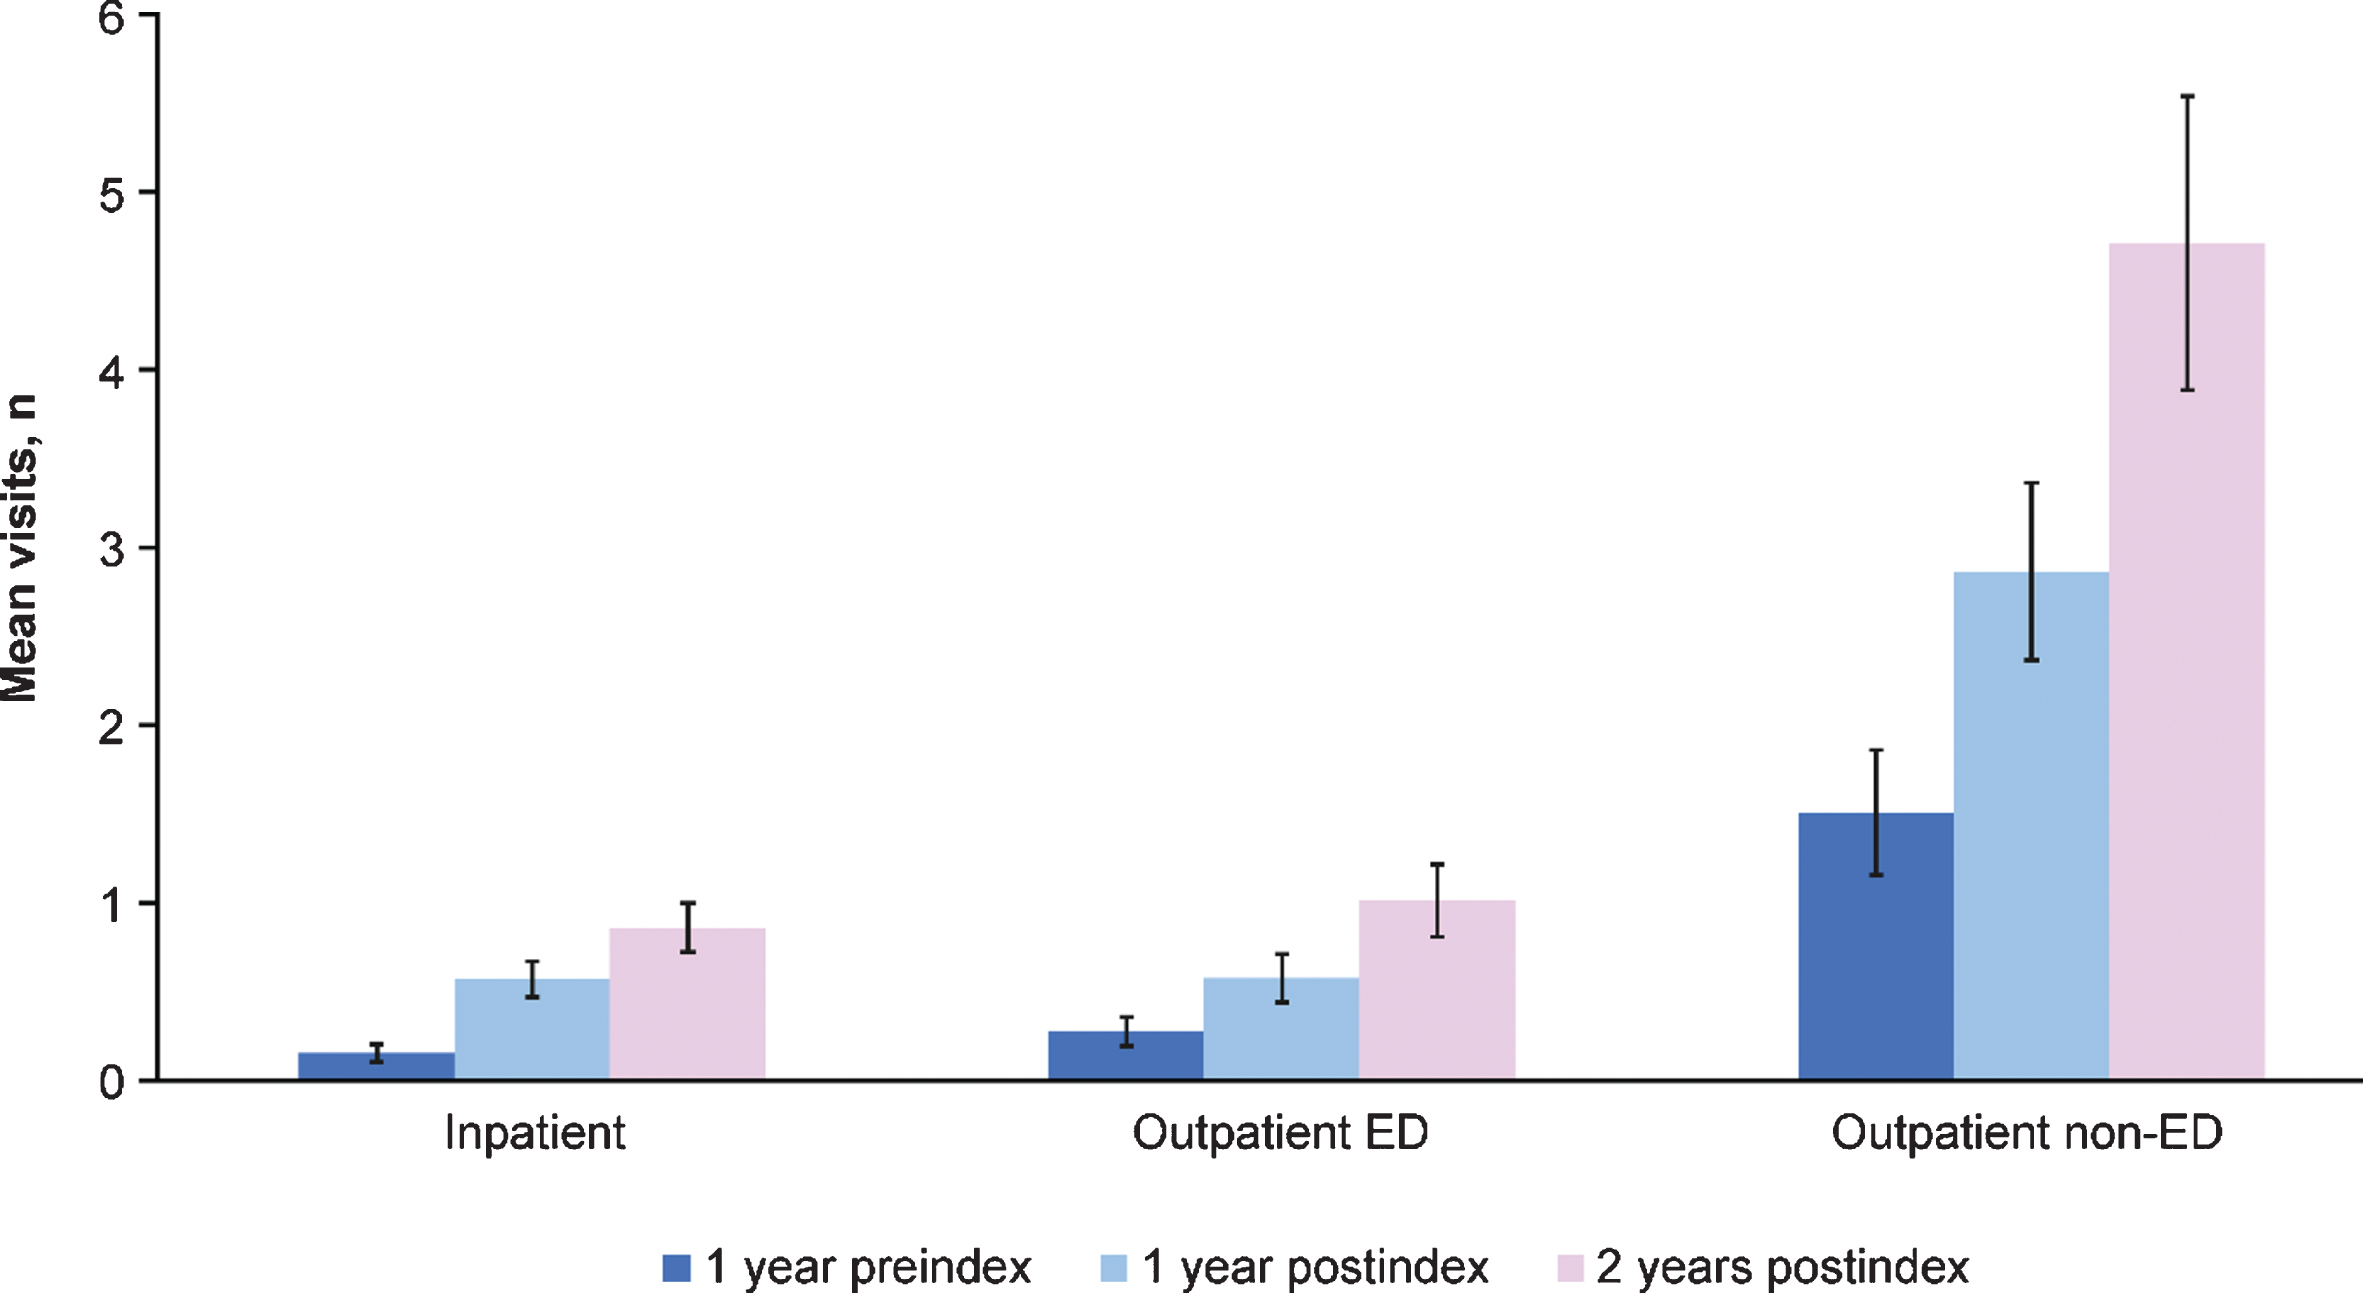 Preindex and postindex visit types and number for all adult patients with spinal muscular atrophy (N = 446) across all age groups. ED = emergency department. Error bars are 95% confidence intervals.